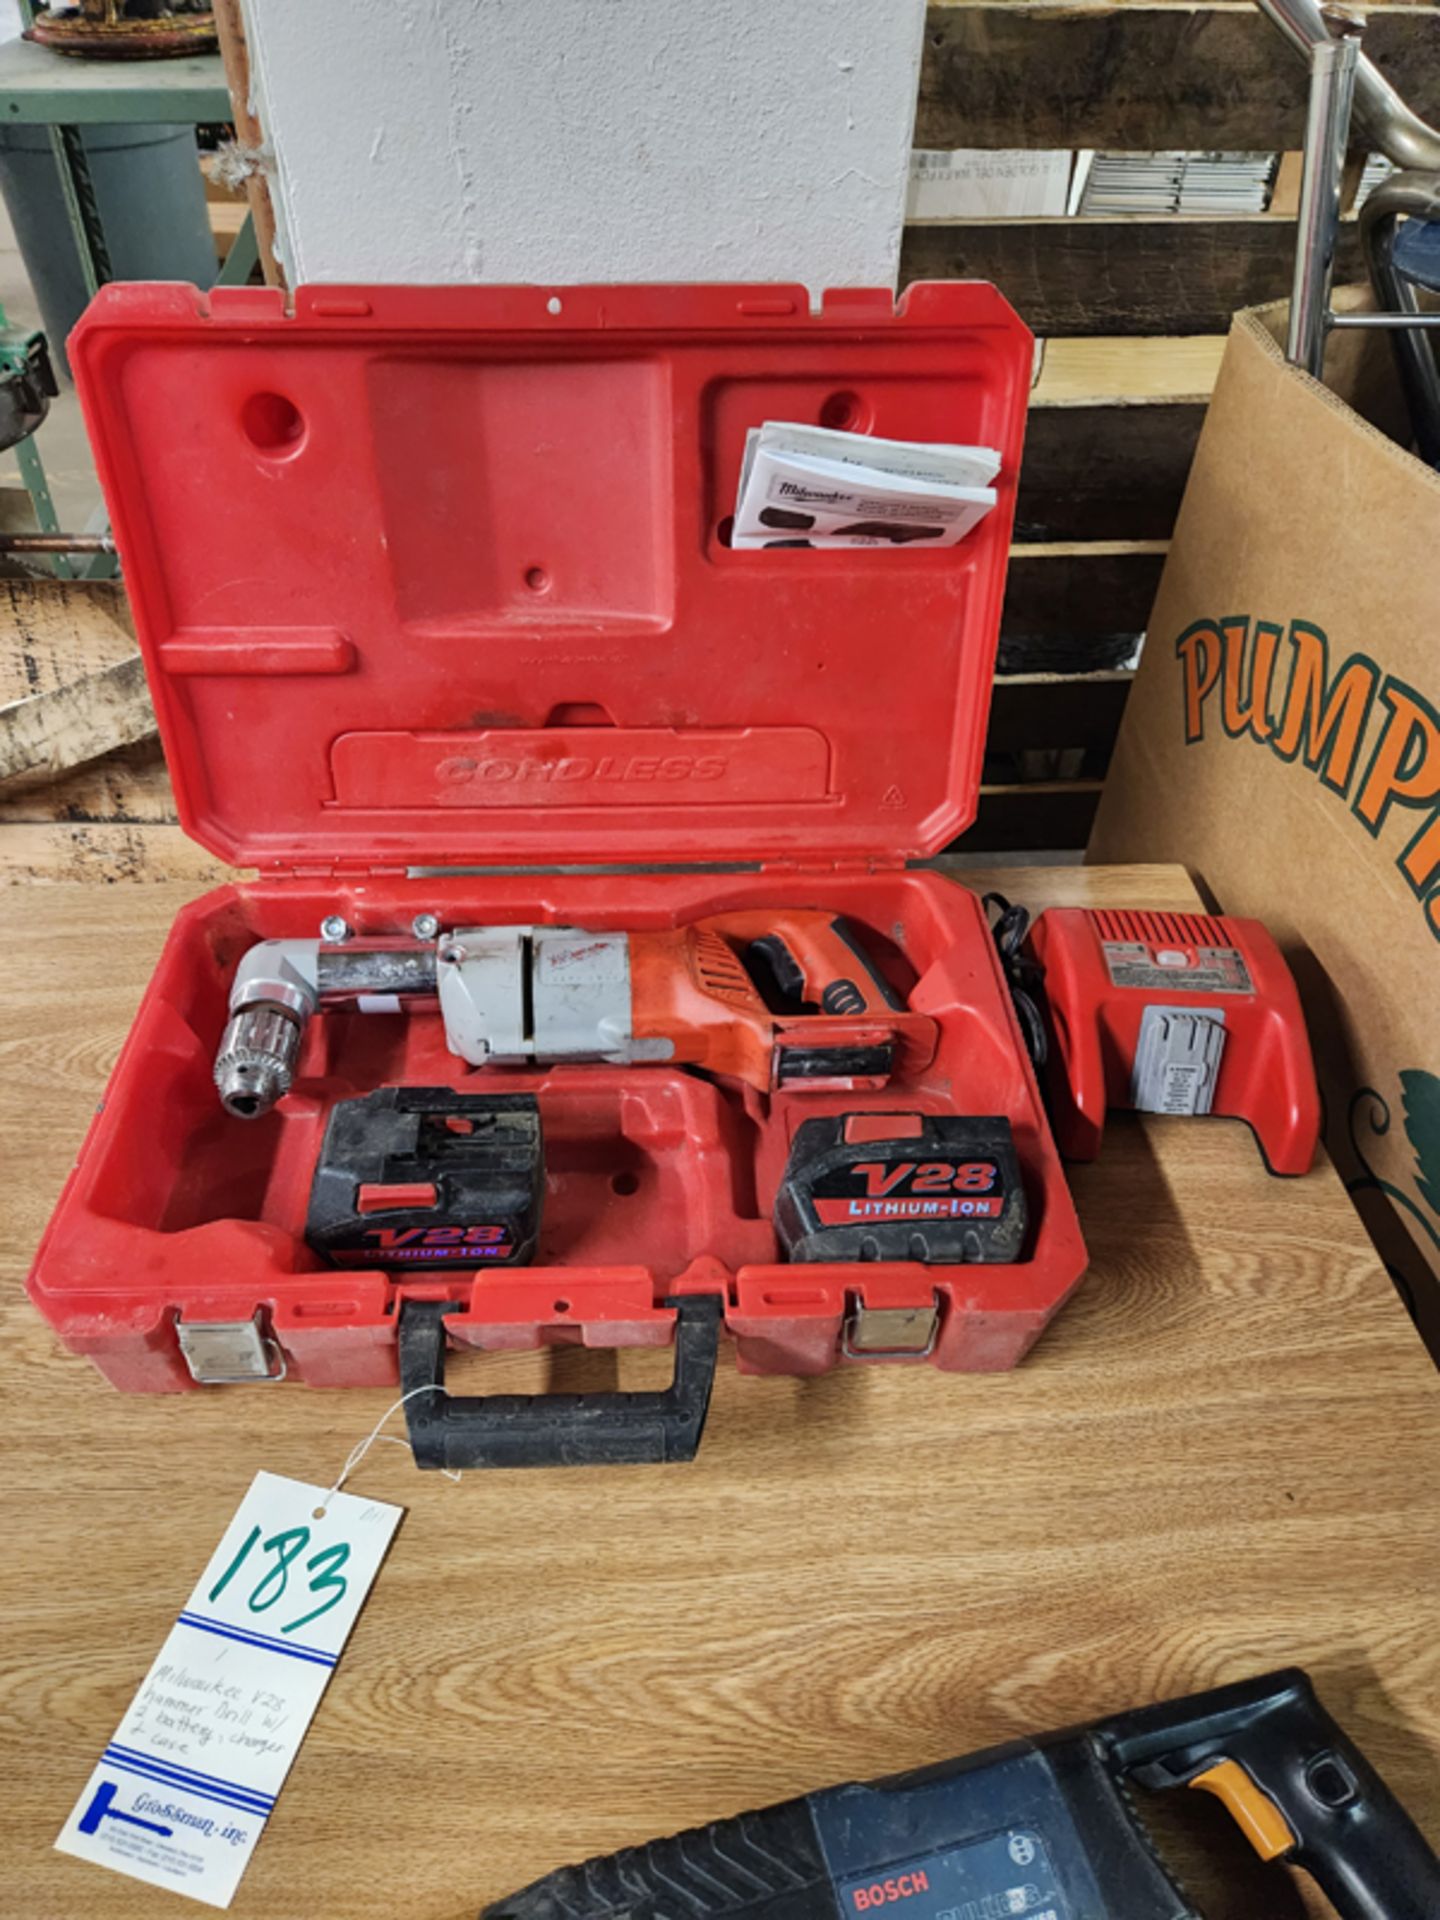 MILWAUKEE V28 HAMMER DRILL WITH 2 BATTERIES, CHARGER AND CASE